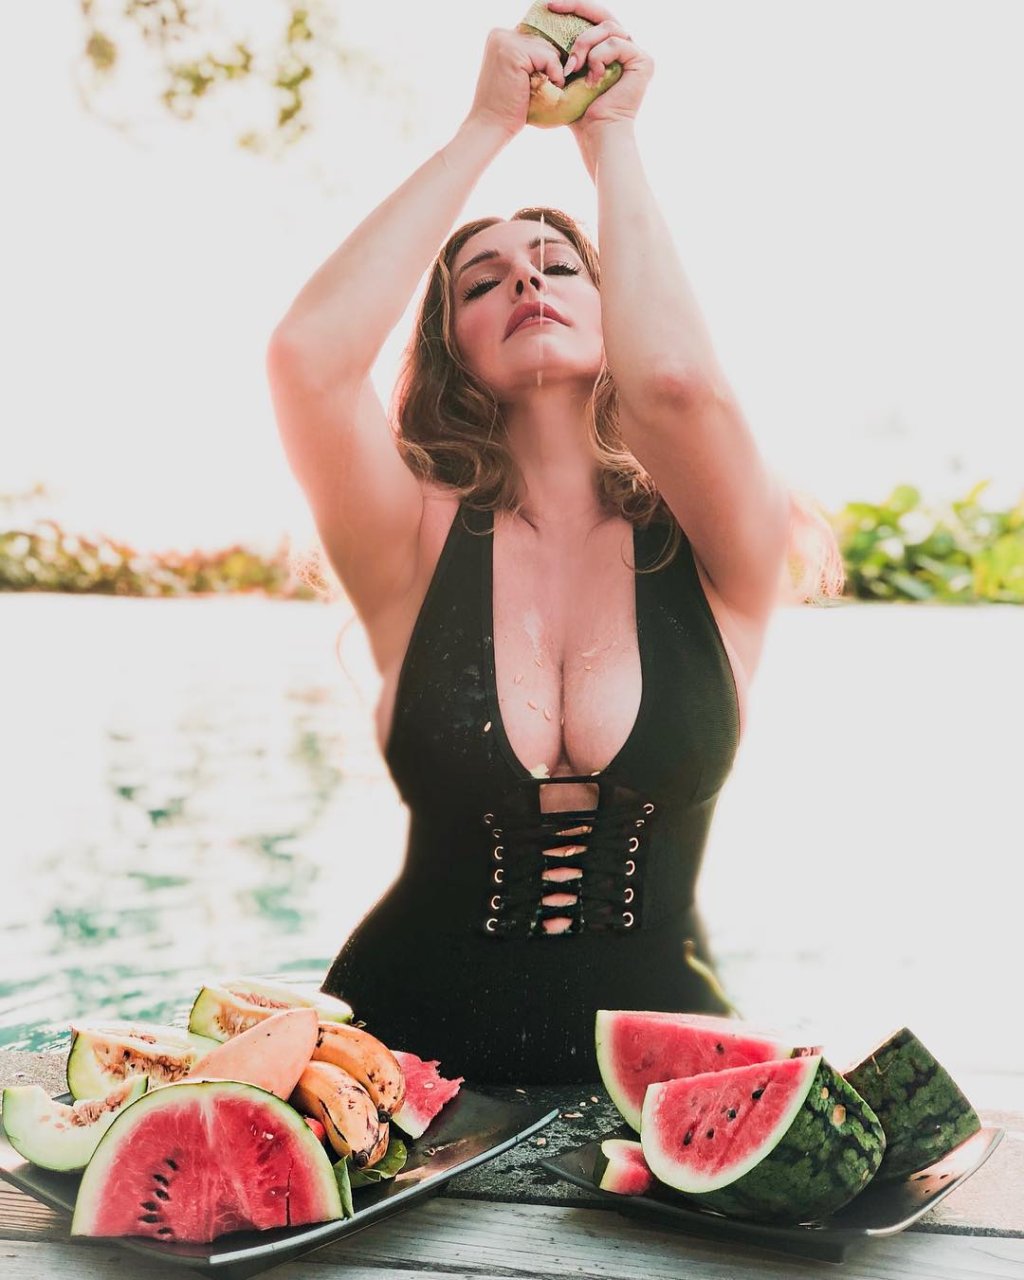 Kelly Brook Made A Splash In Boob-Baring Swimsuit (2 Pics)